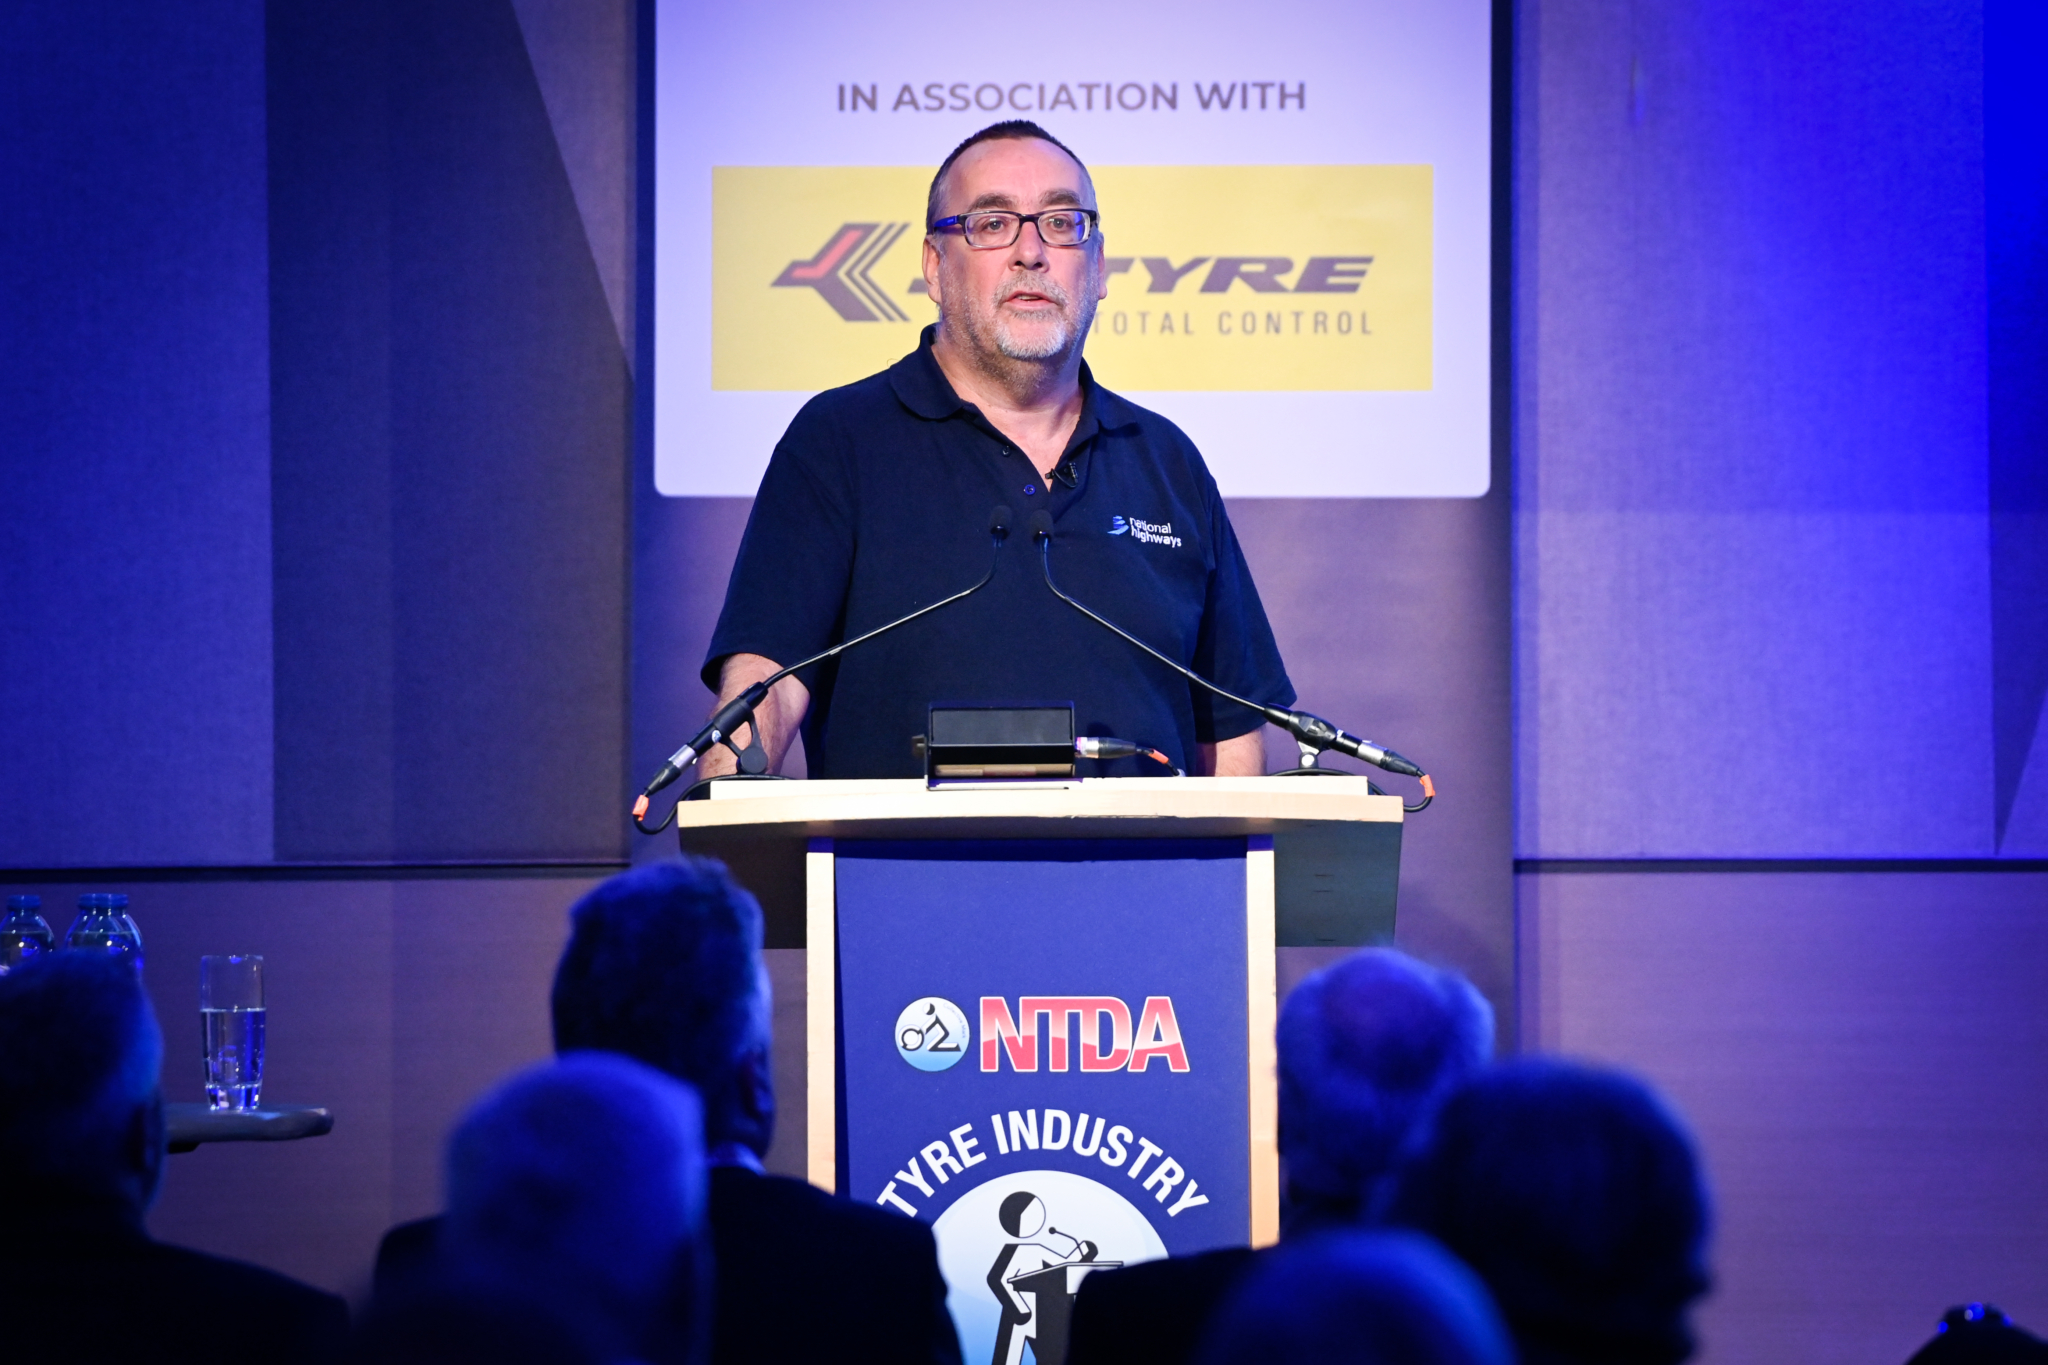 The power and responsibility of tyre distribution – key sessions in the 2022 Tyre Industry Conference